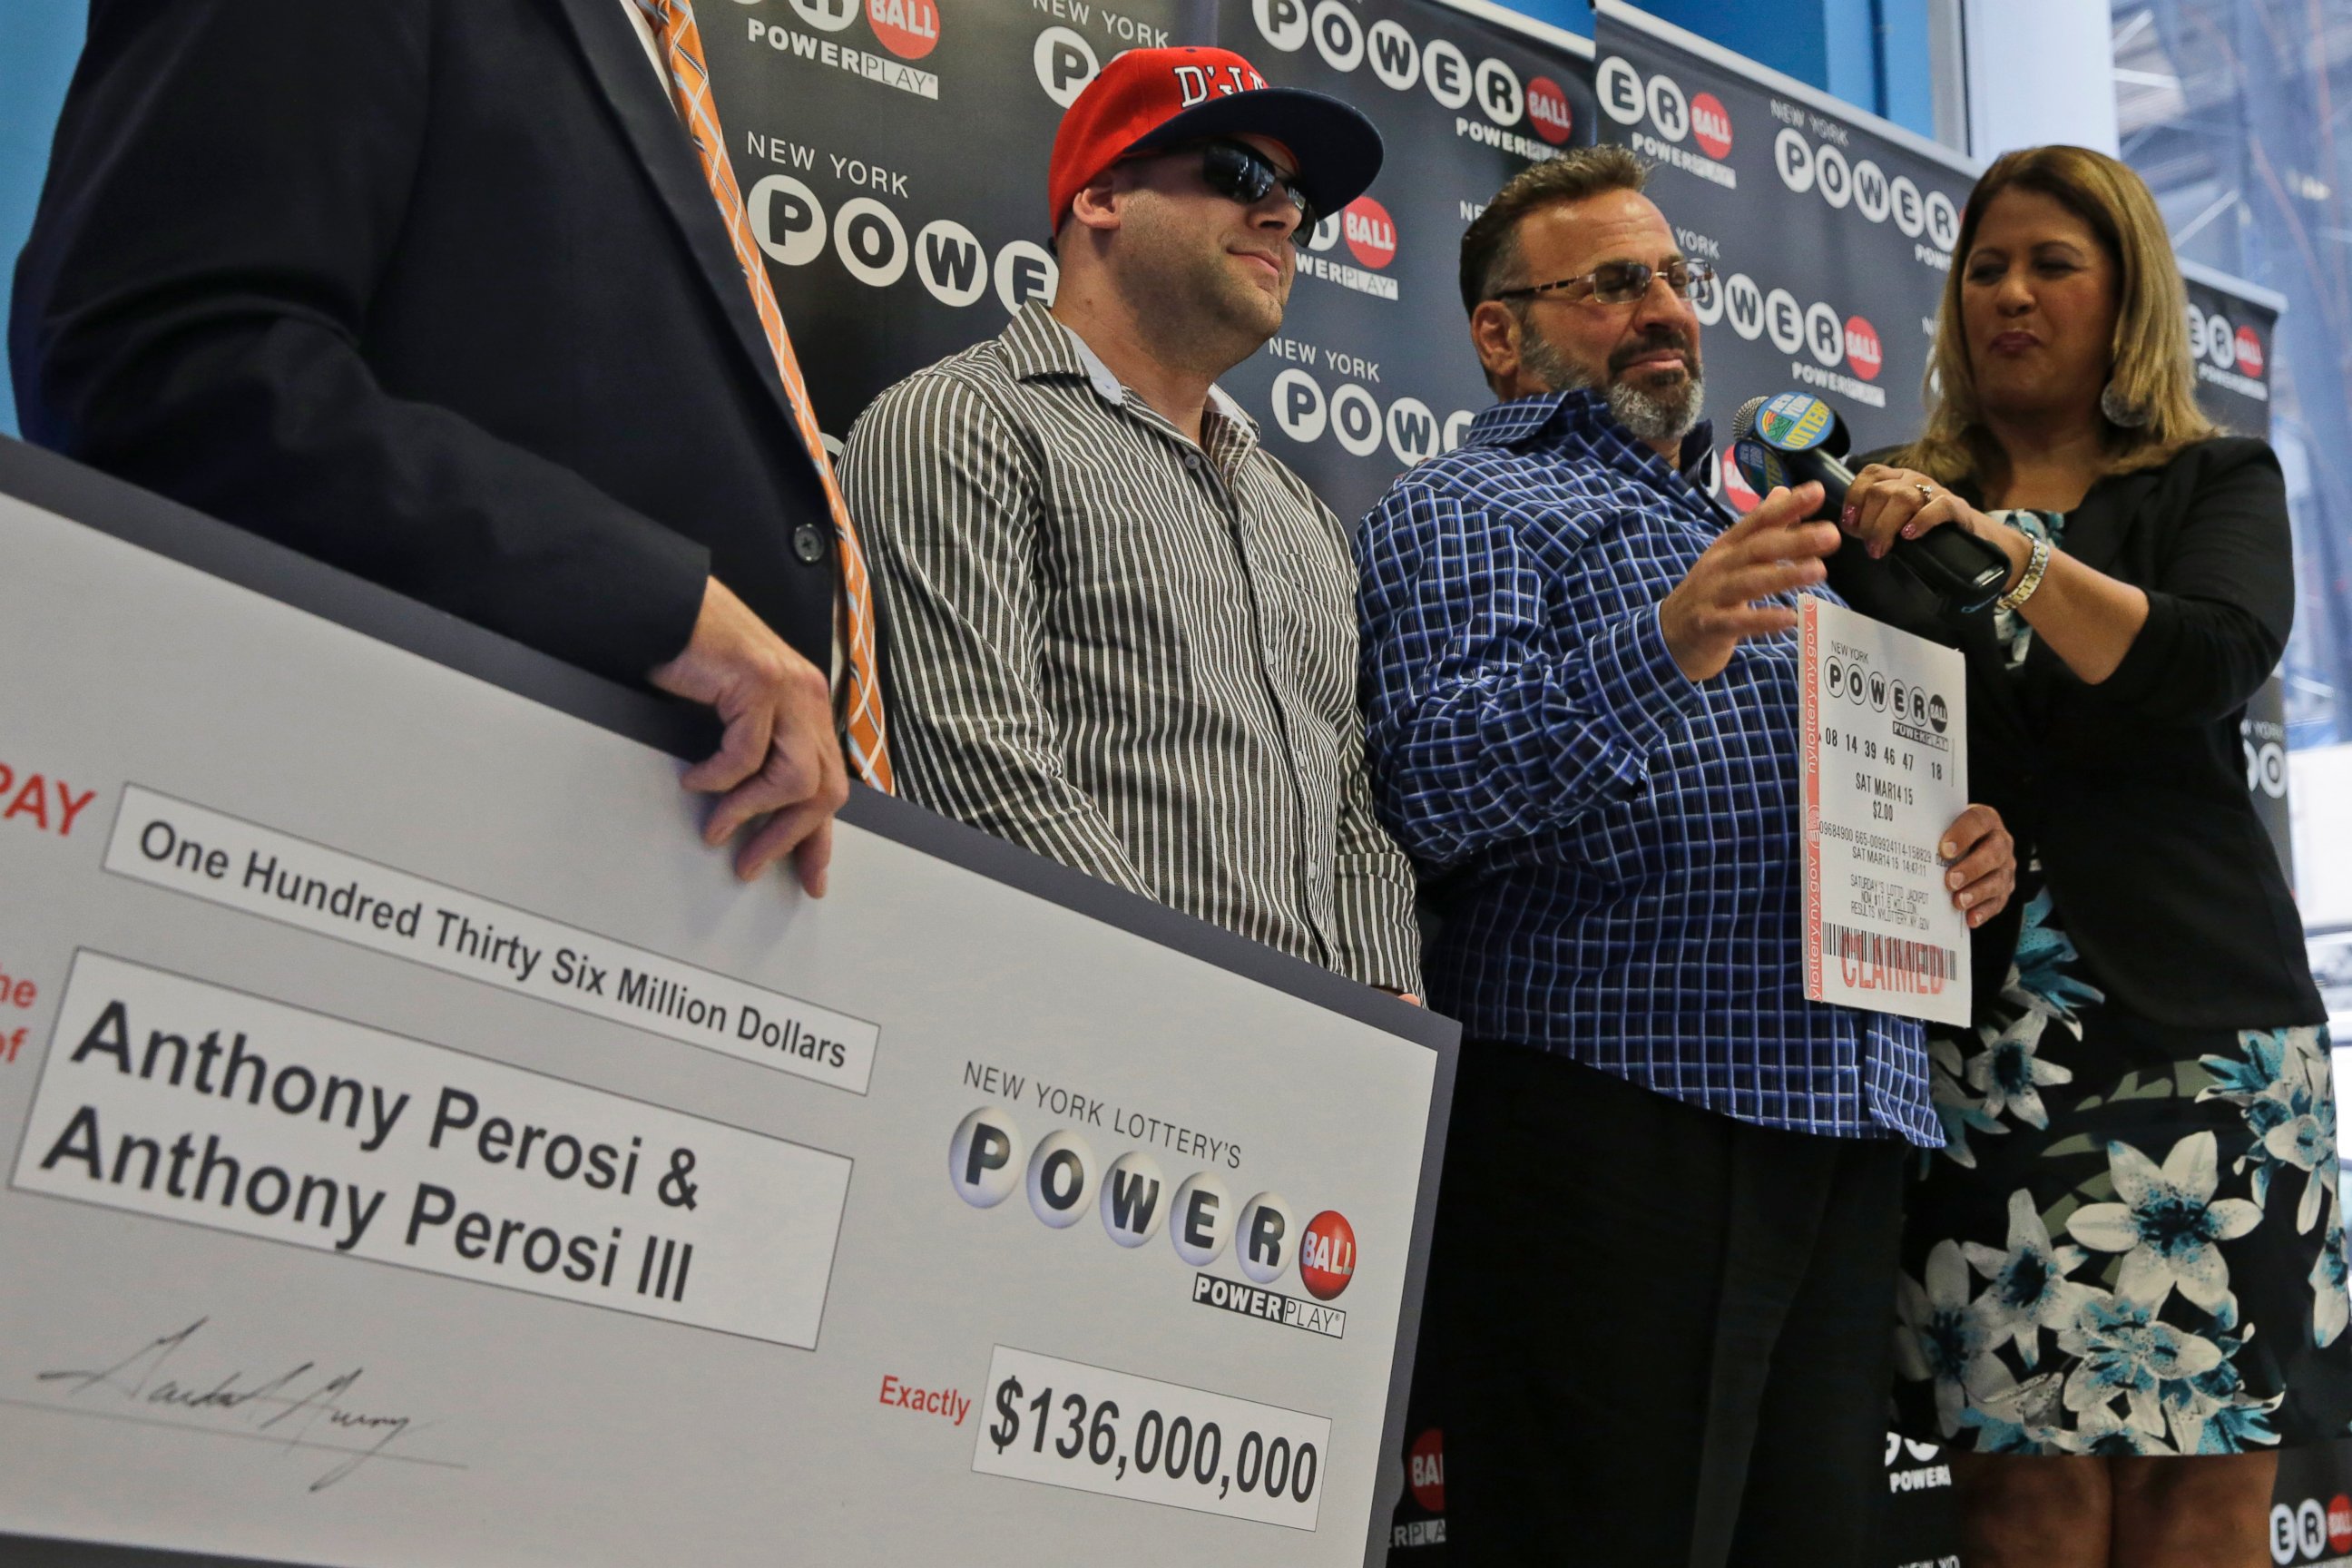 PHOTO: Anthony Perosi, second from right, holding a copy of the winning power ball ticket and his son Anthony Perosi III, second from left, as New York's Lottery Yolanda Vega, right,  presented a prize check, June 4, 2015, in New York.